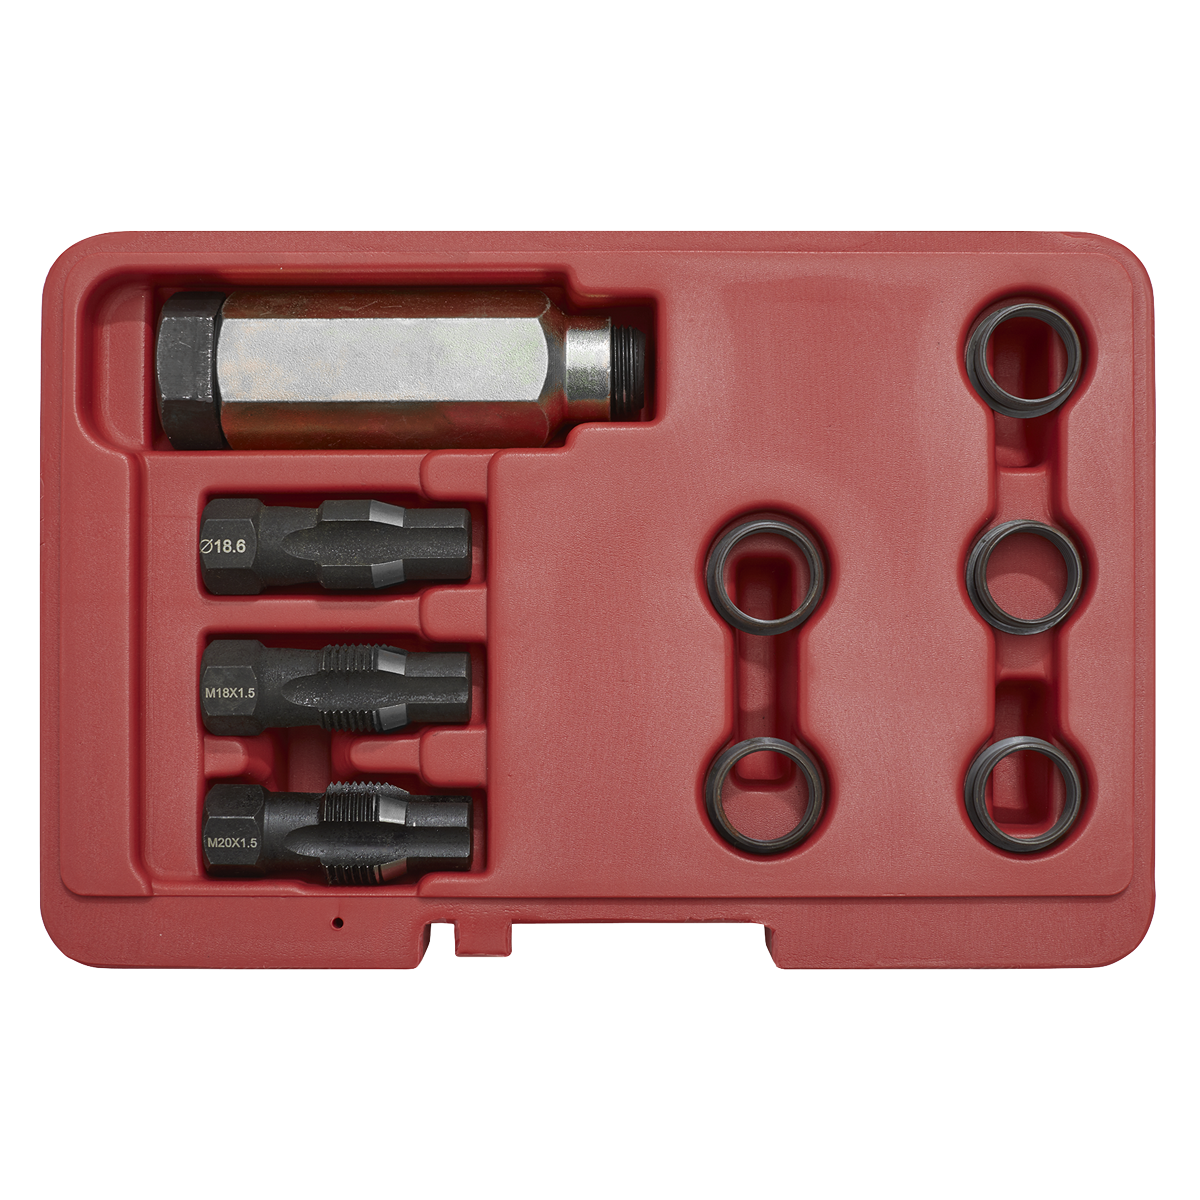 Kit includes installation tool, reamer, two taps and five inserts in storage case.